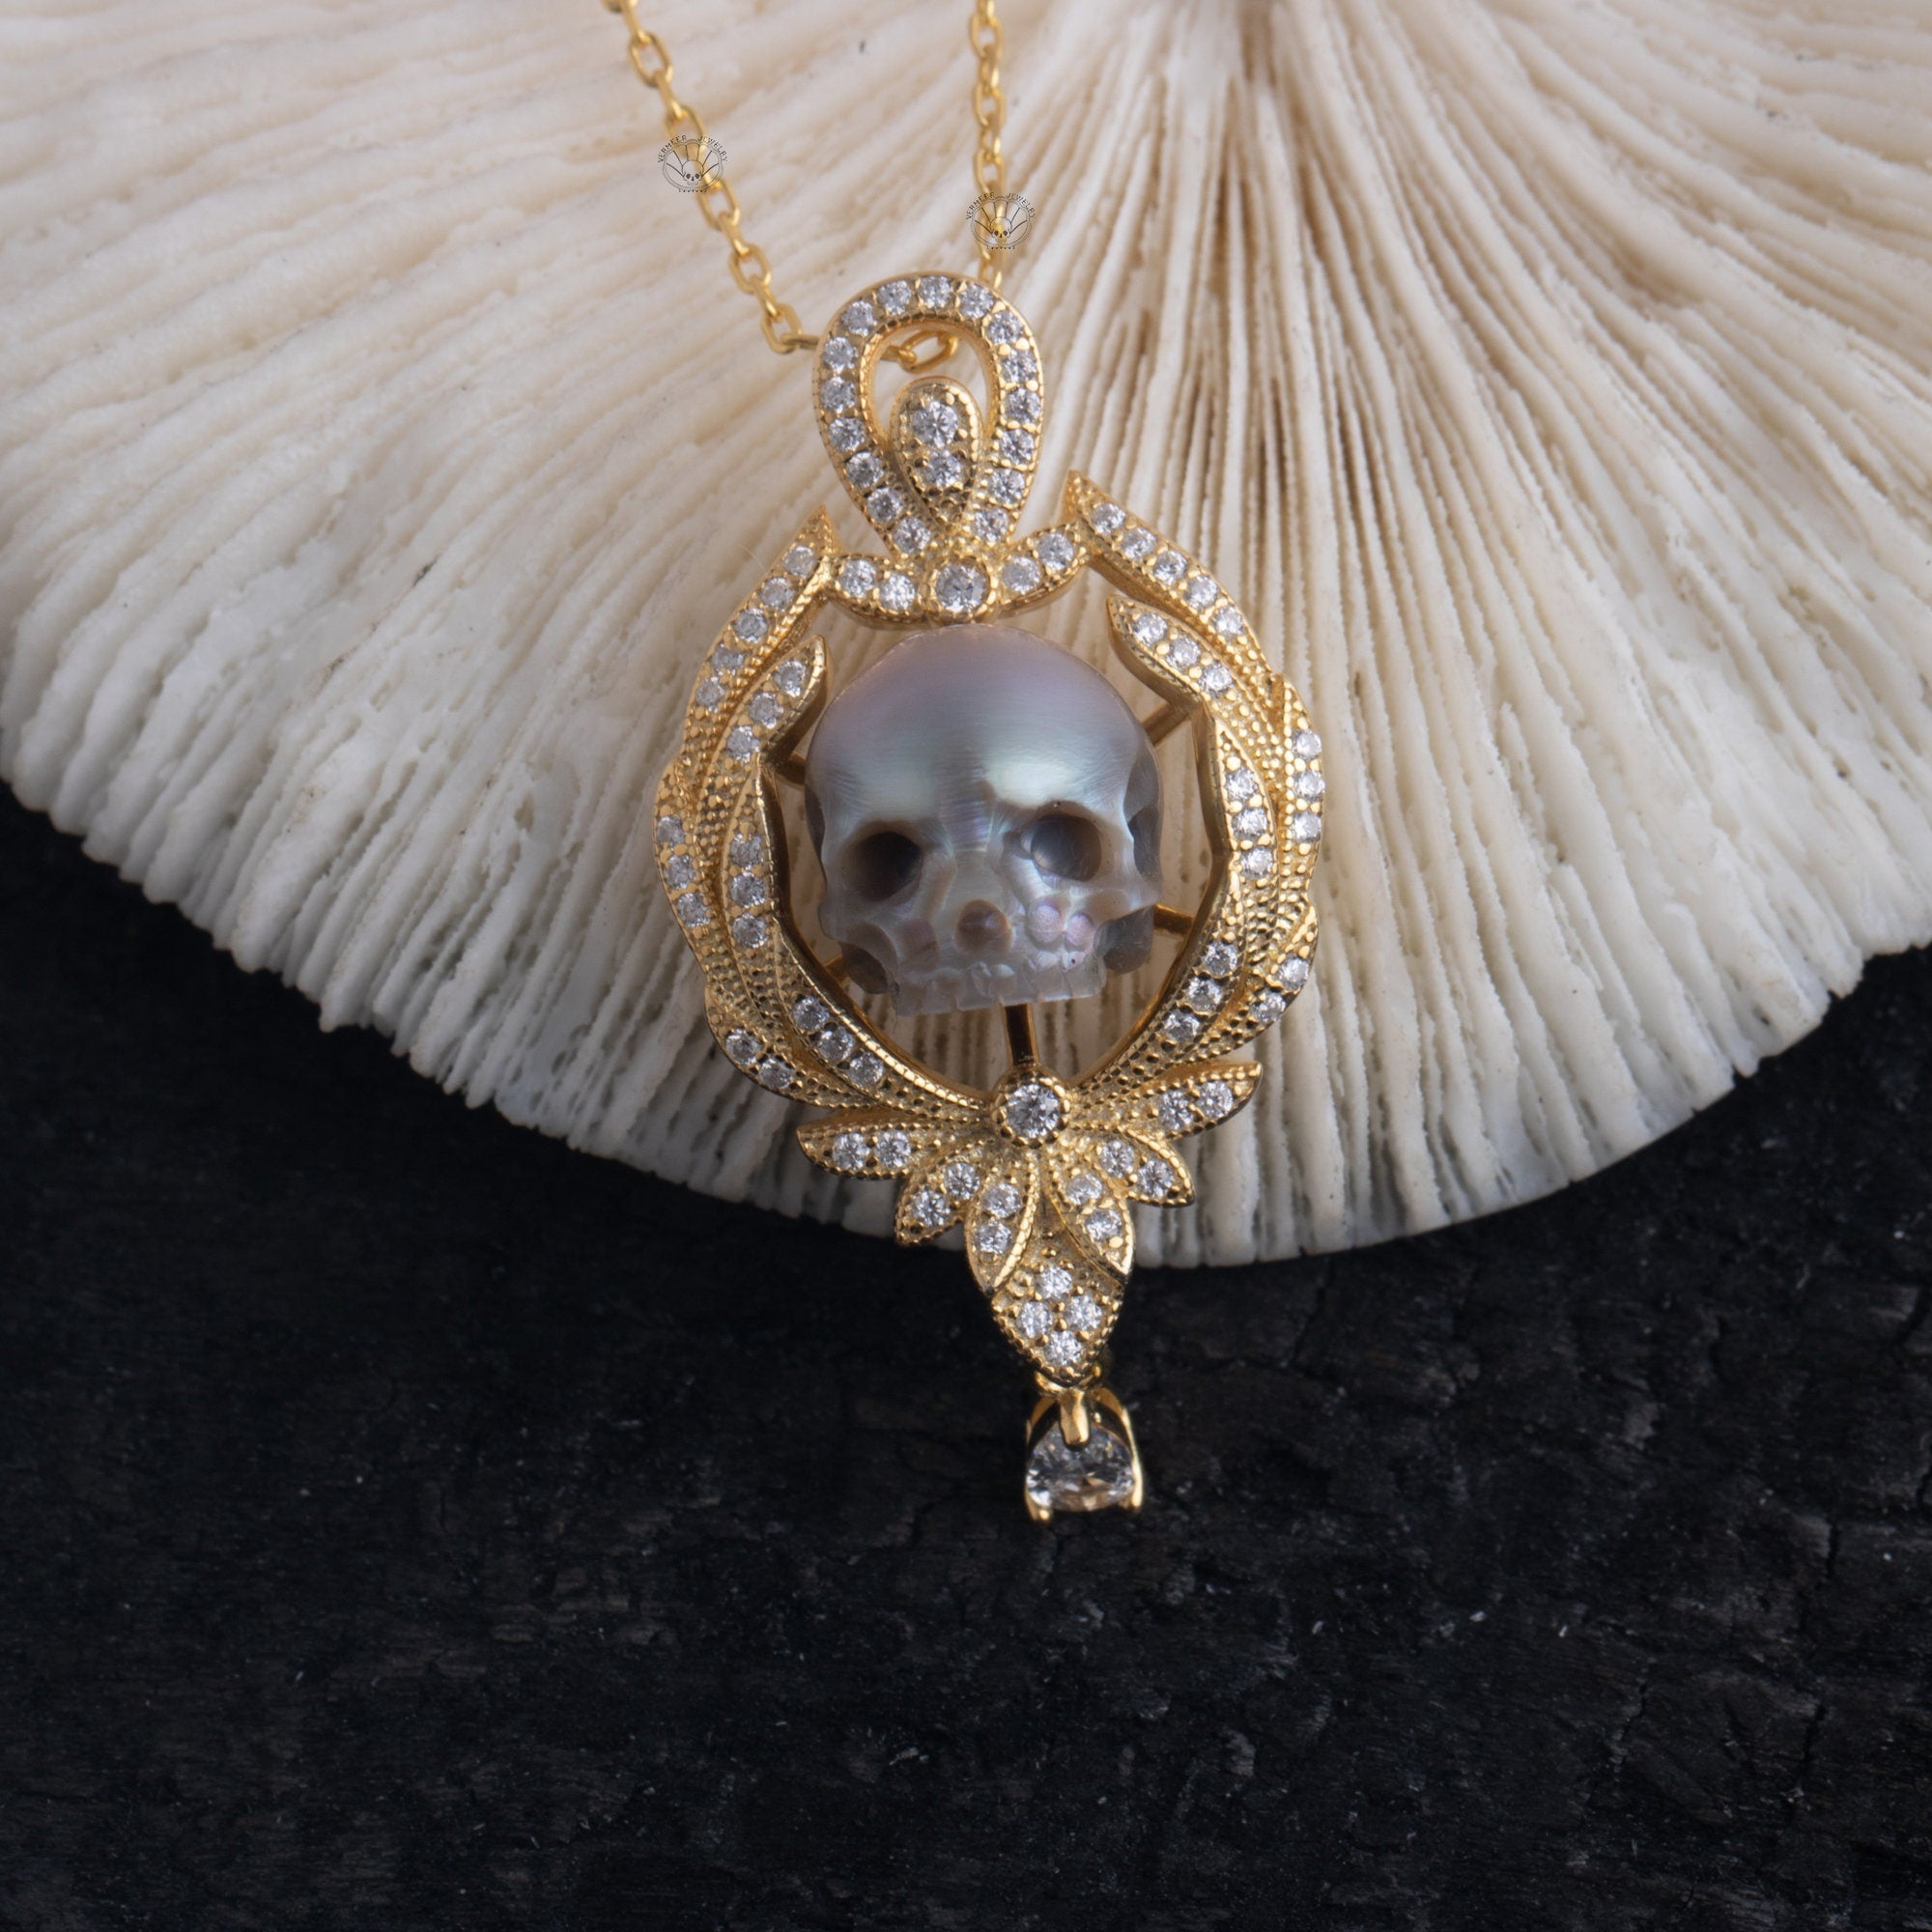 Mother's hug Necklace skull carved pearl S925 silver necklace